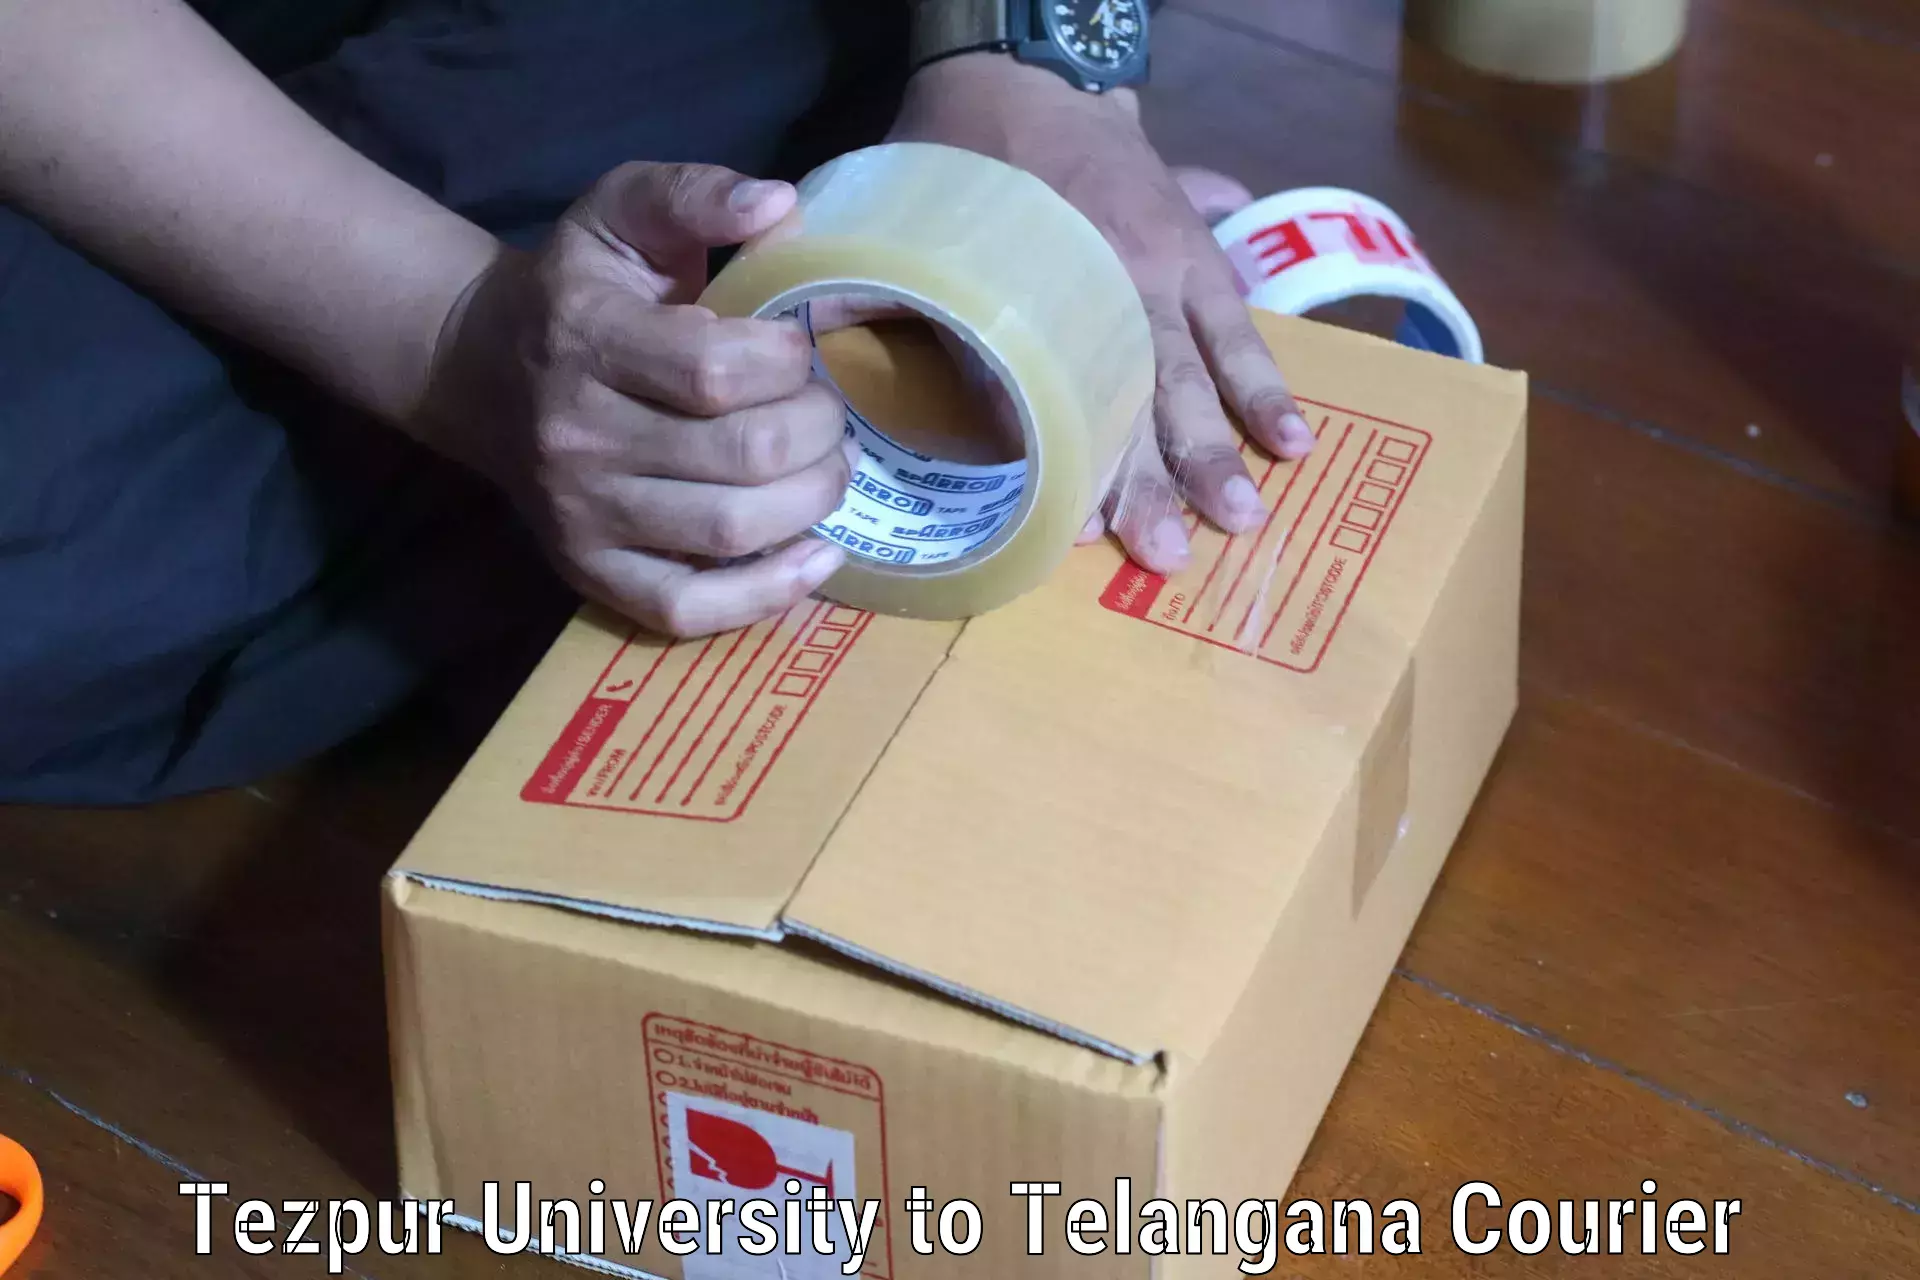 Professional courier services in Tezpur University to Kamareddy